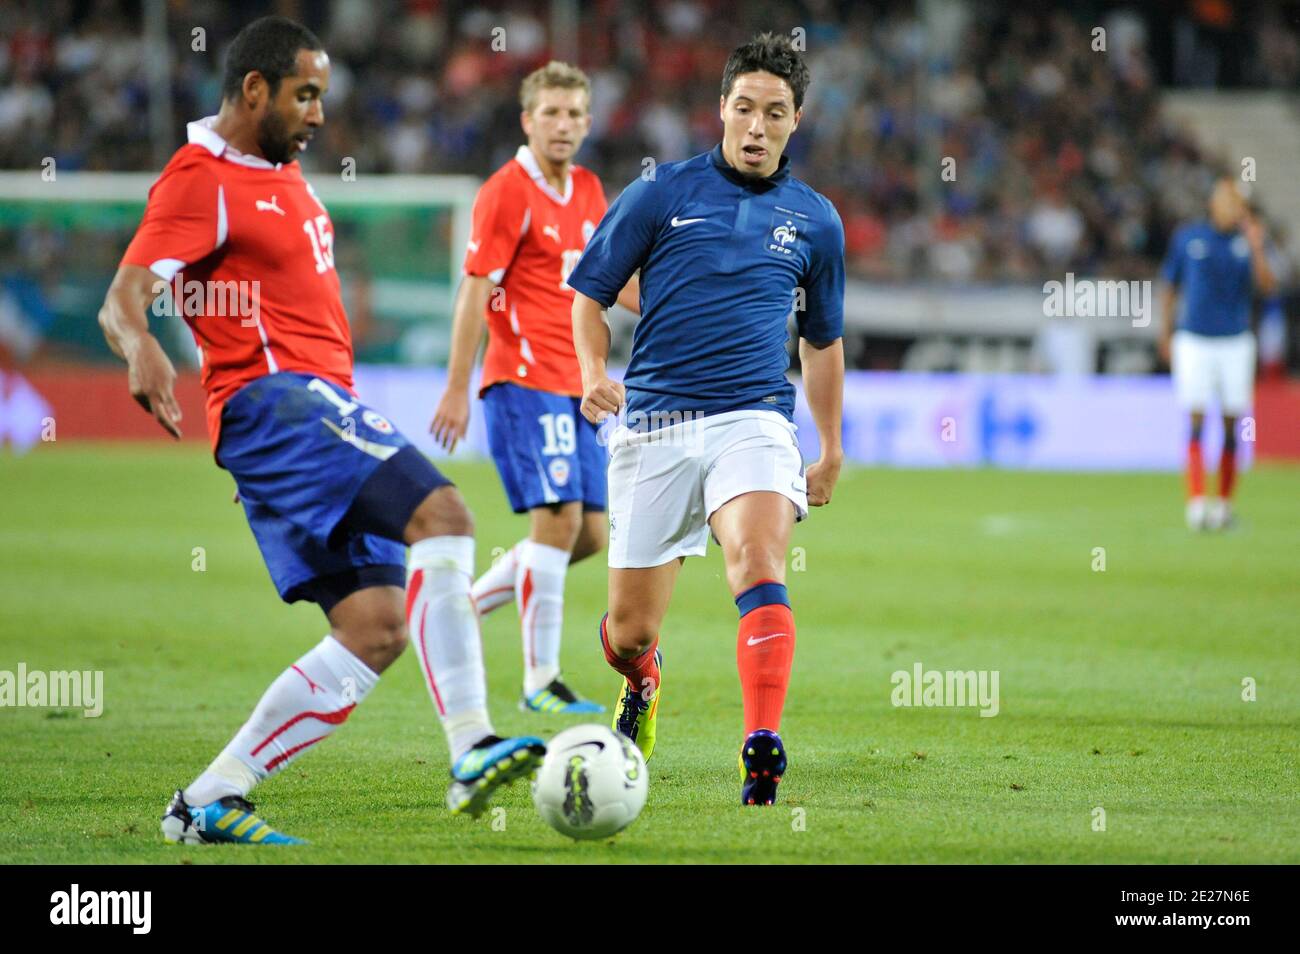 France's Samir Nasri fights for the ball with Chile's Jean Beausejour during International Friendly soccer match, France vs Chile at Stade de la Mosson in Montpellier, France on August 10, 2011. The match ended in a 1-1 draw. Photo by Sylvain Thomas/ABACAPRESS.COM Stock Photo